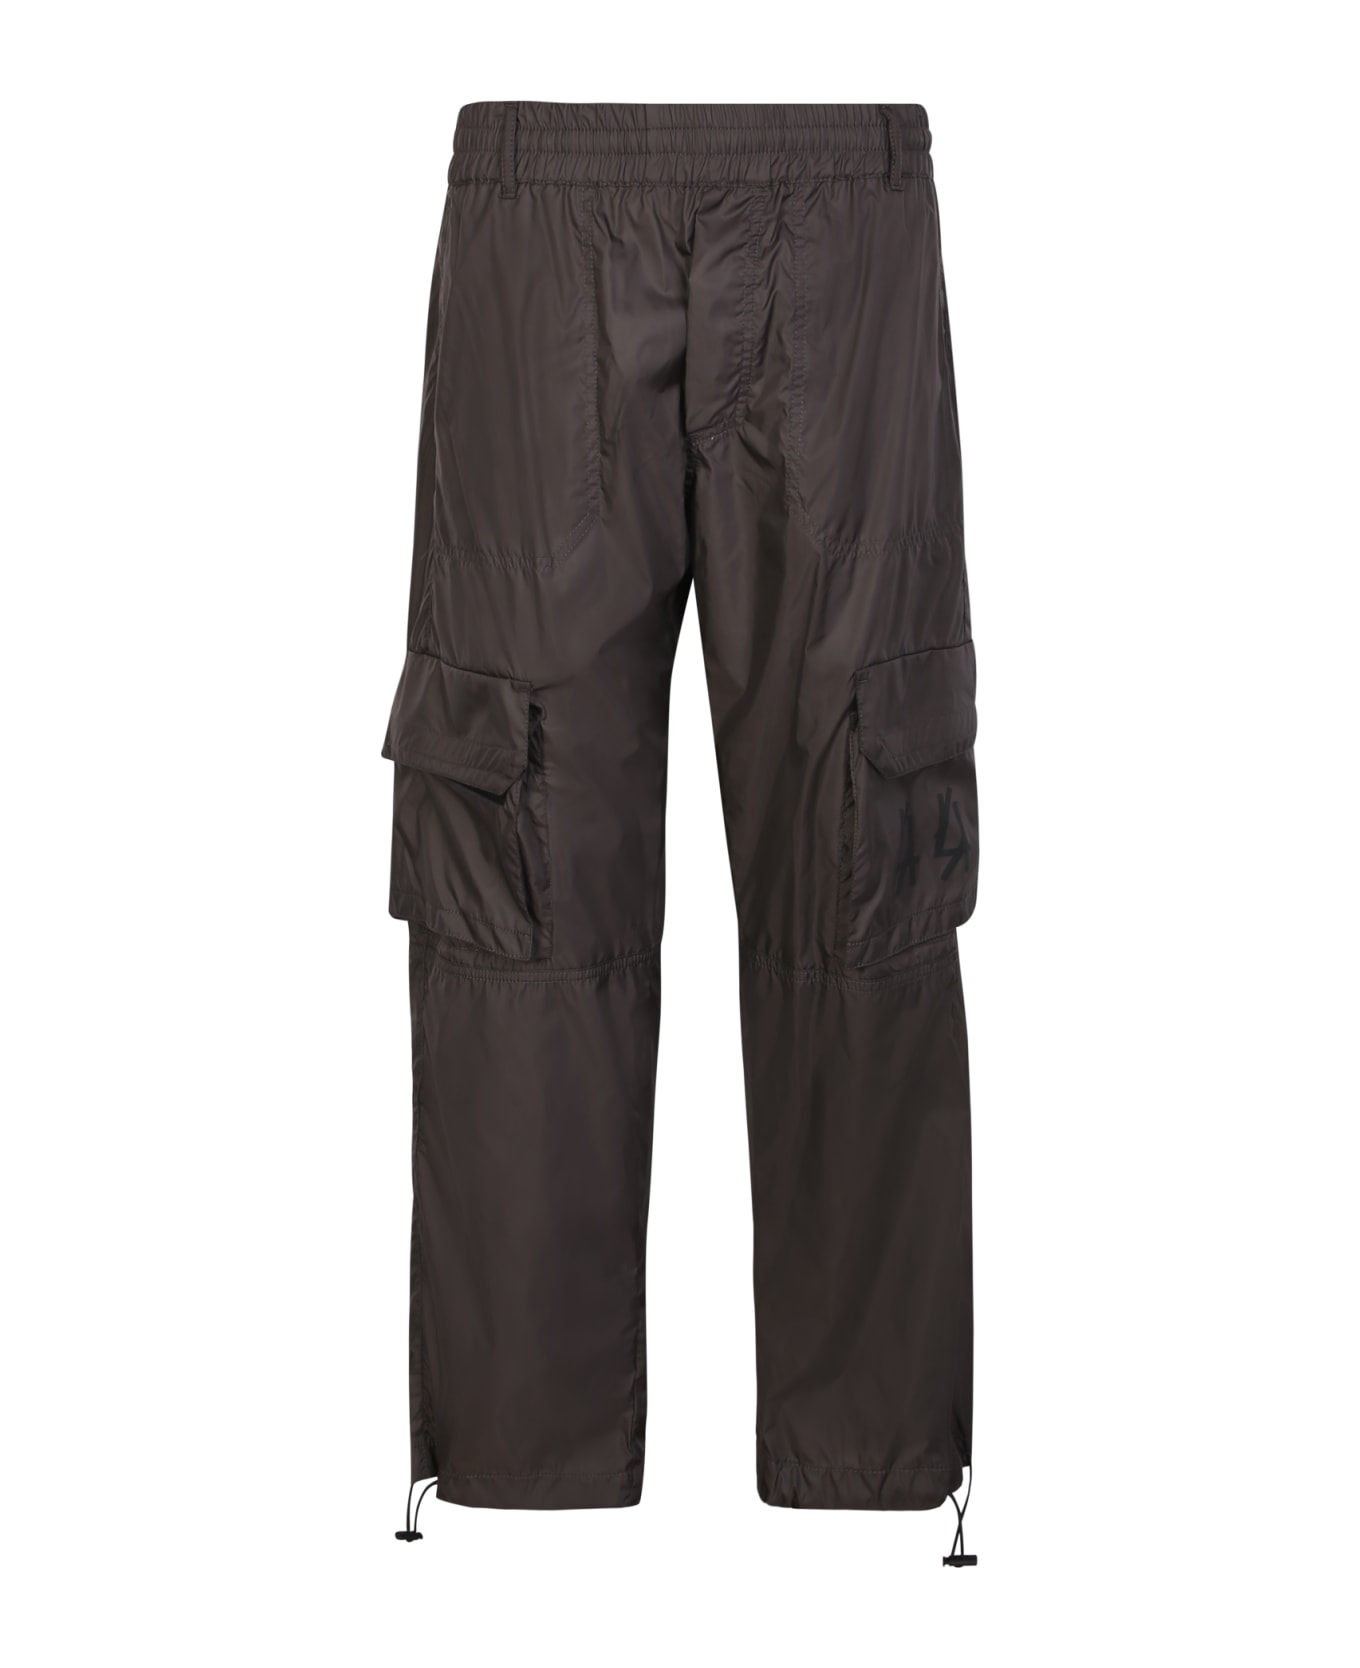 44 Label Group Cargo Trousers - Brown ボトムス